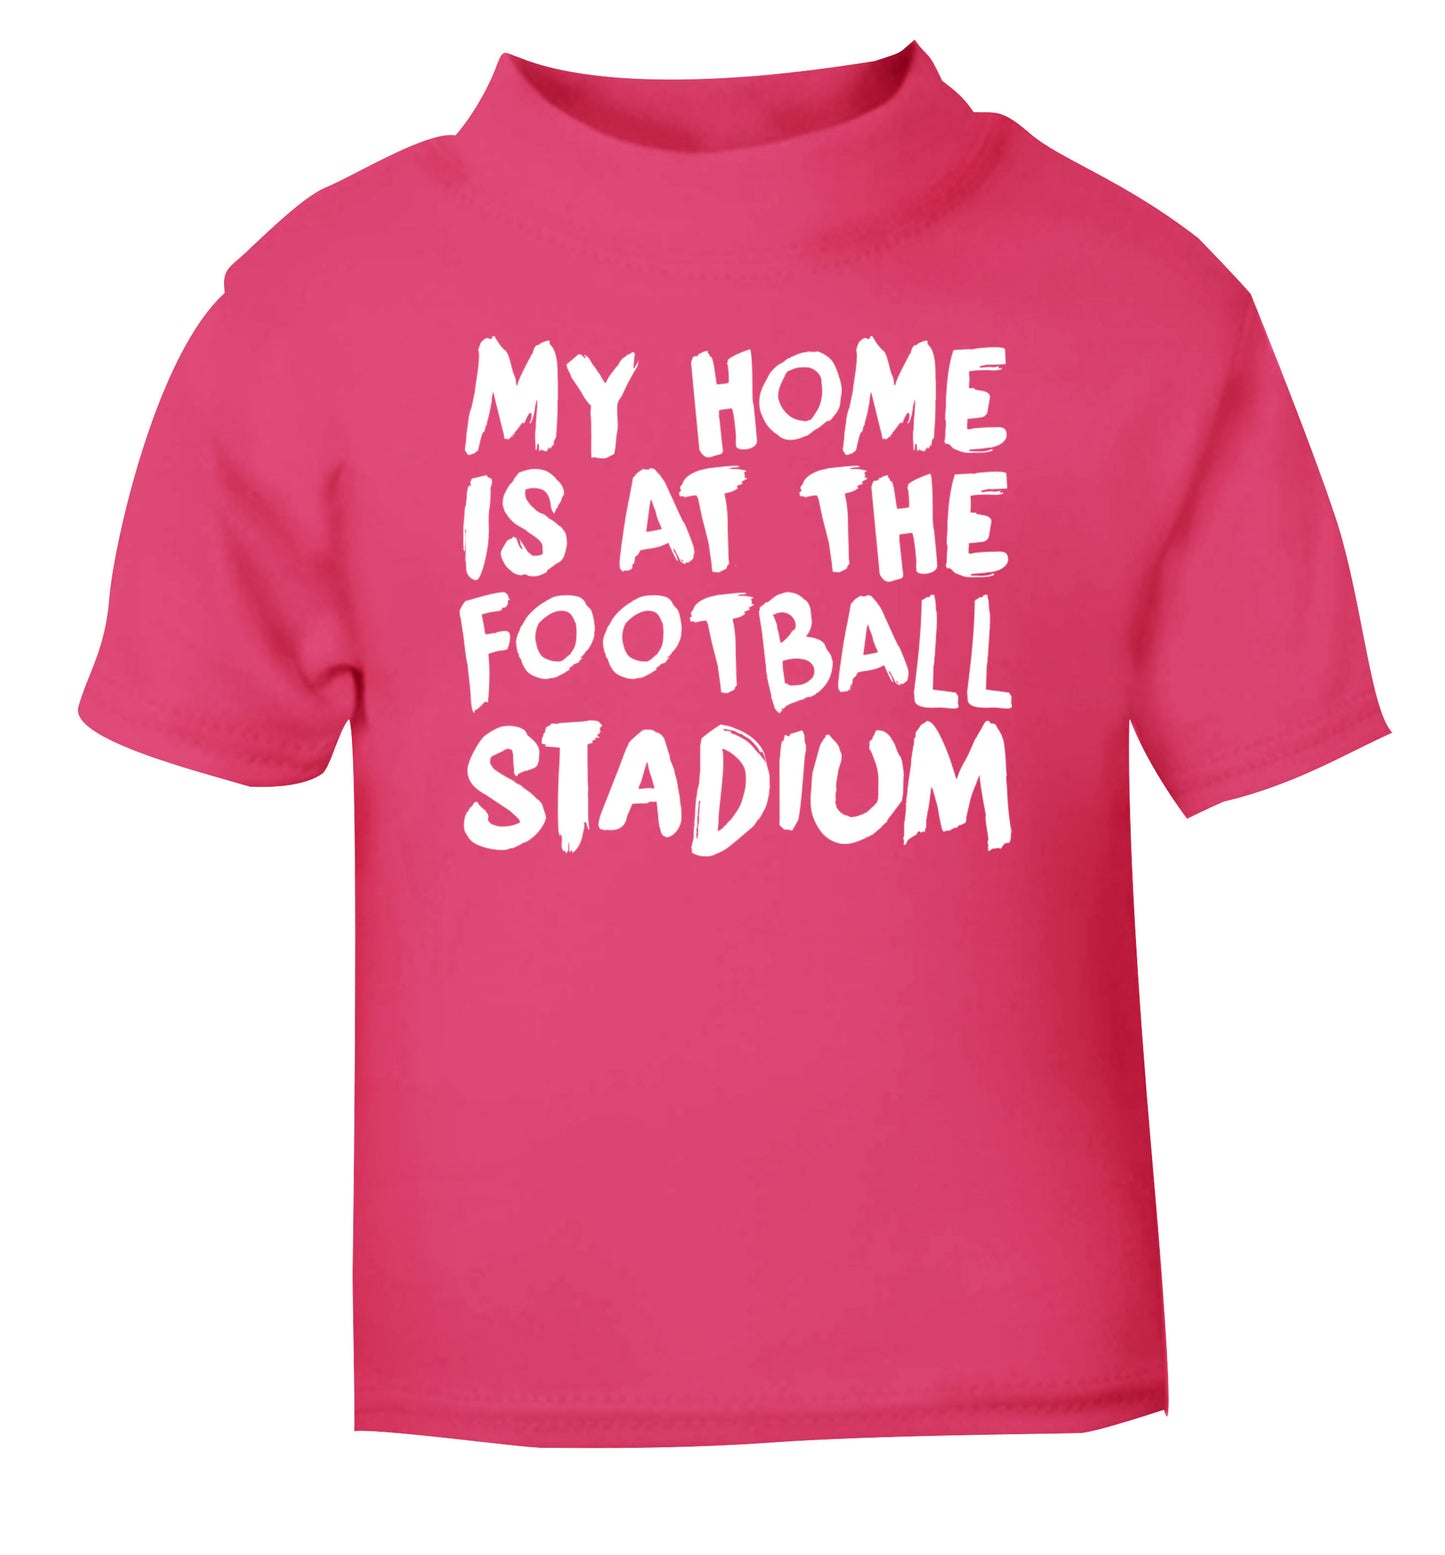 My home is at the football stadium pink Baby Toddler Tshirt 2 Years